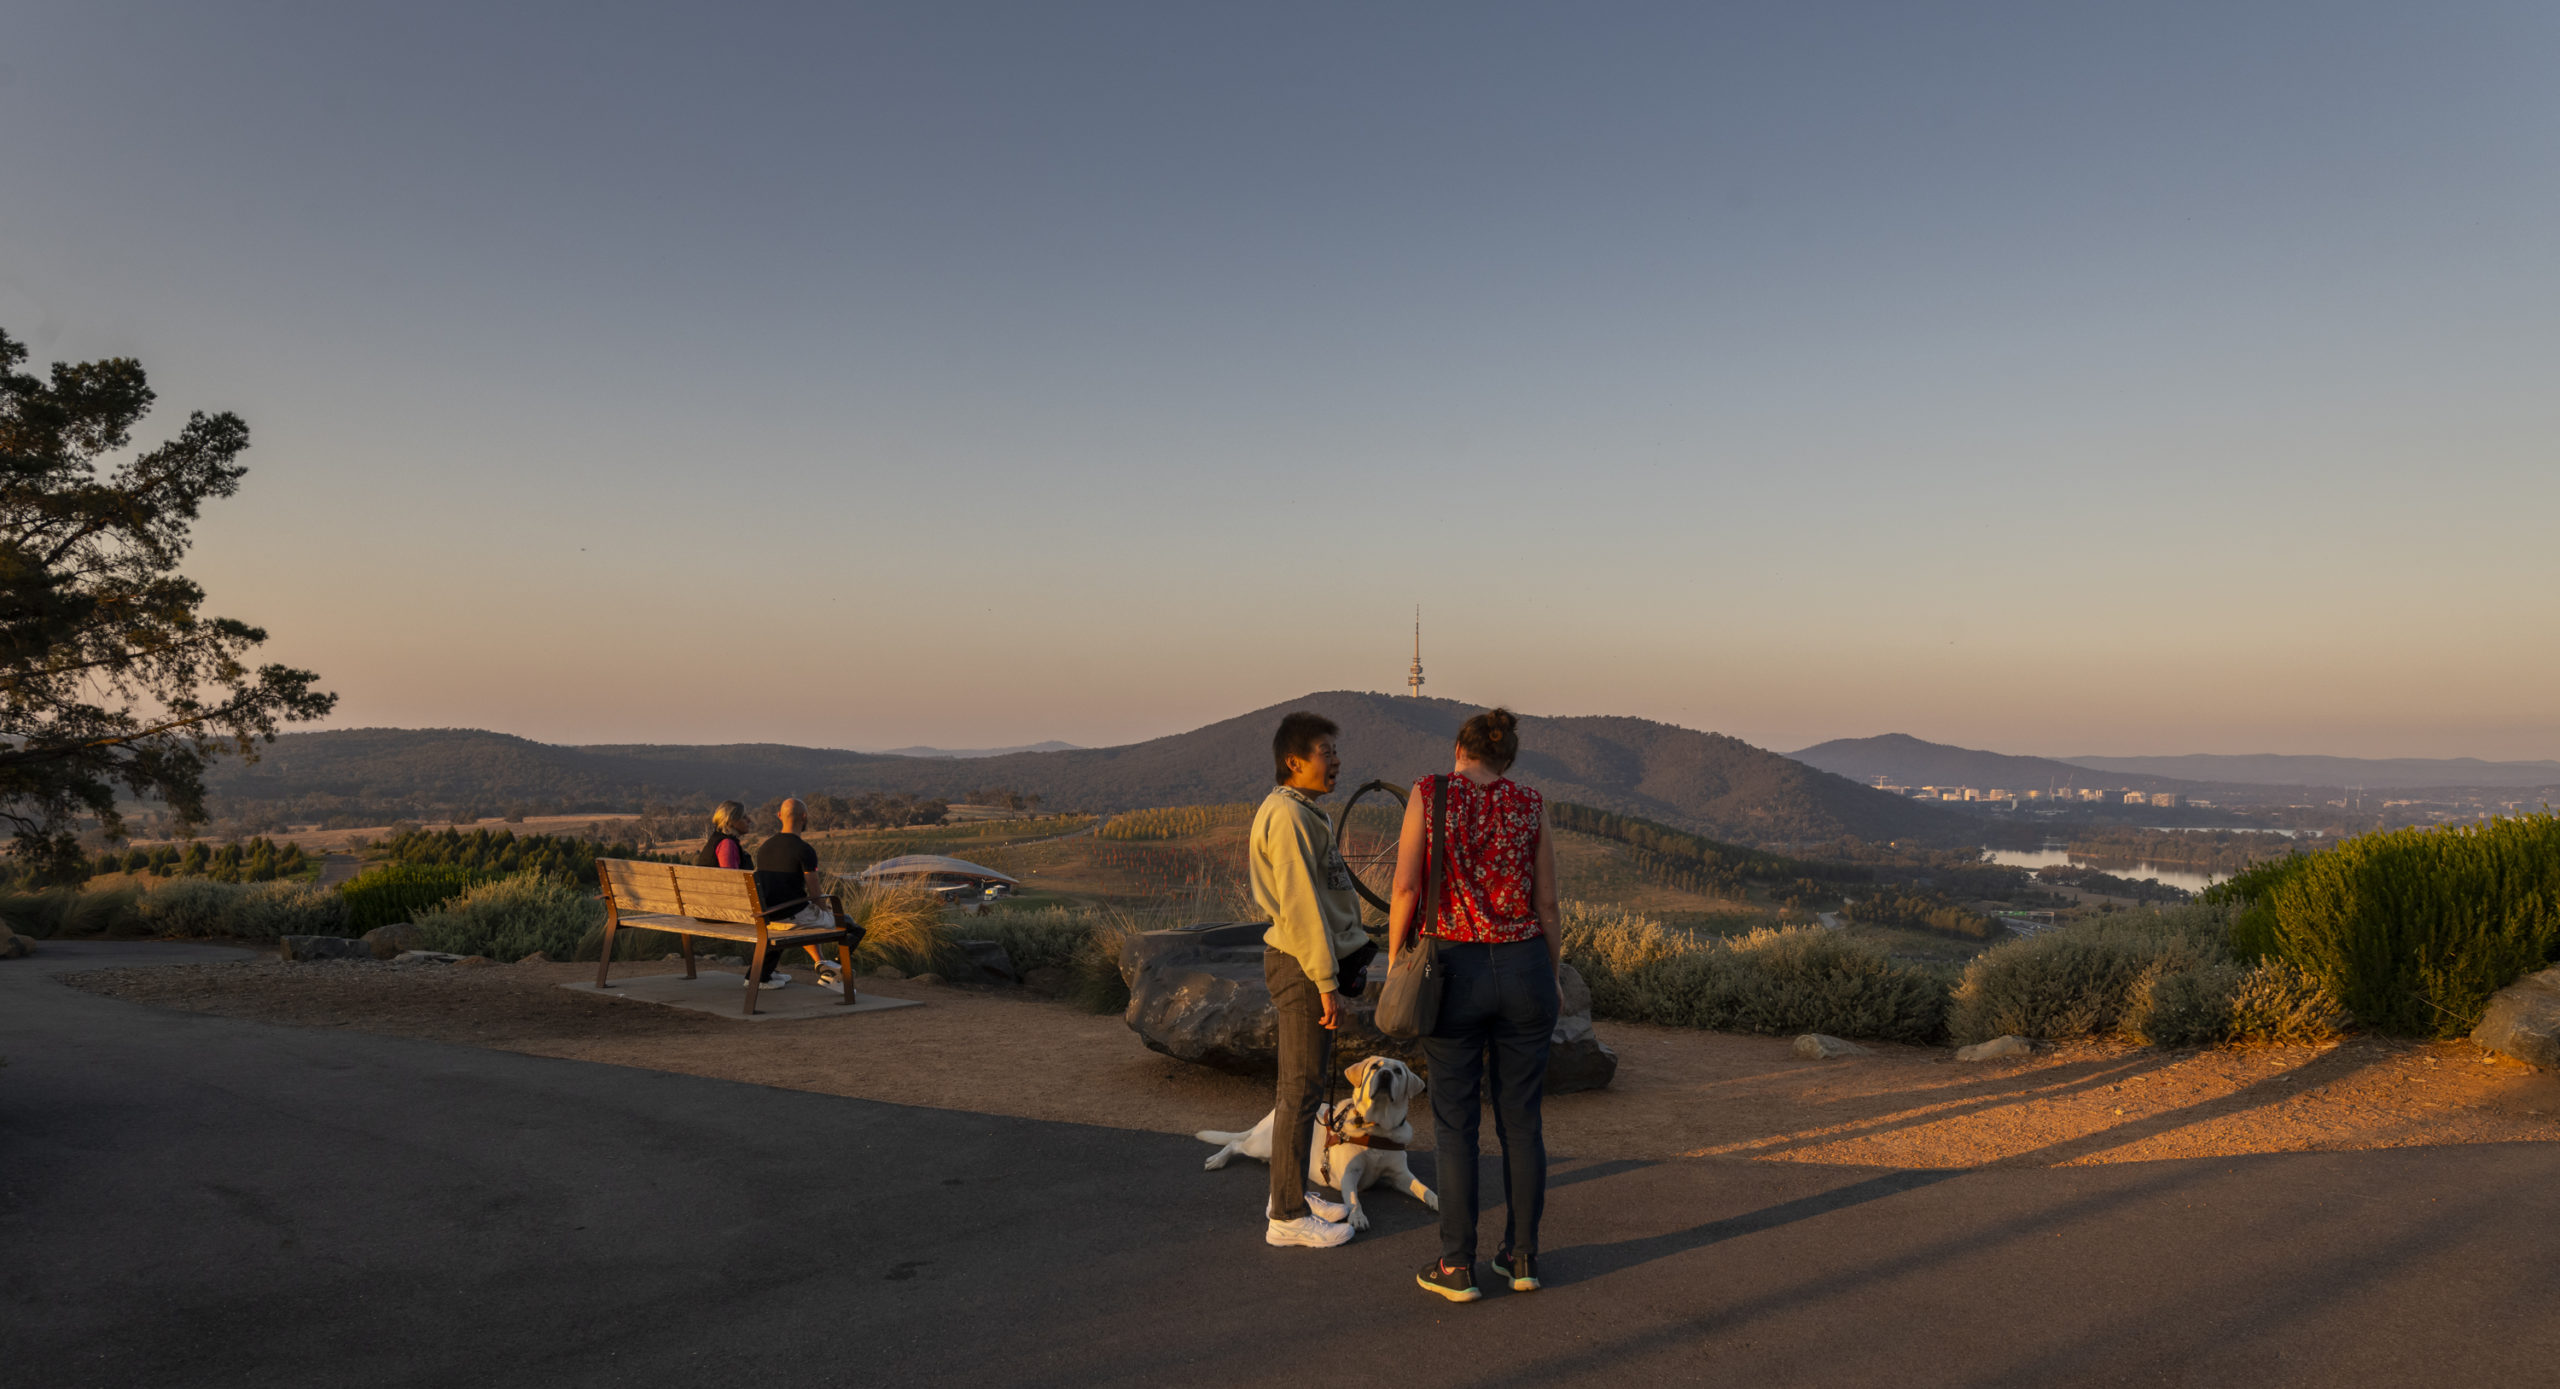 A splendid view of Canberra from the National Arboretum at sunset is admired by two groups of people: sitting on a bench are a deaf woman and a leg amputee, and standing at the forefront a blind woman is chatting with a friend in a red blouse.